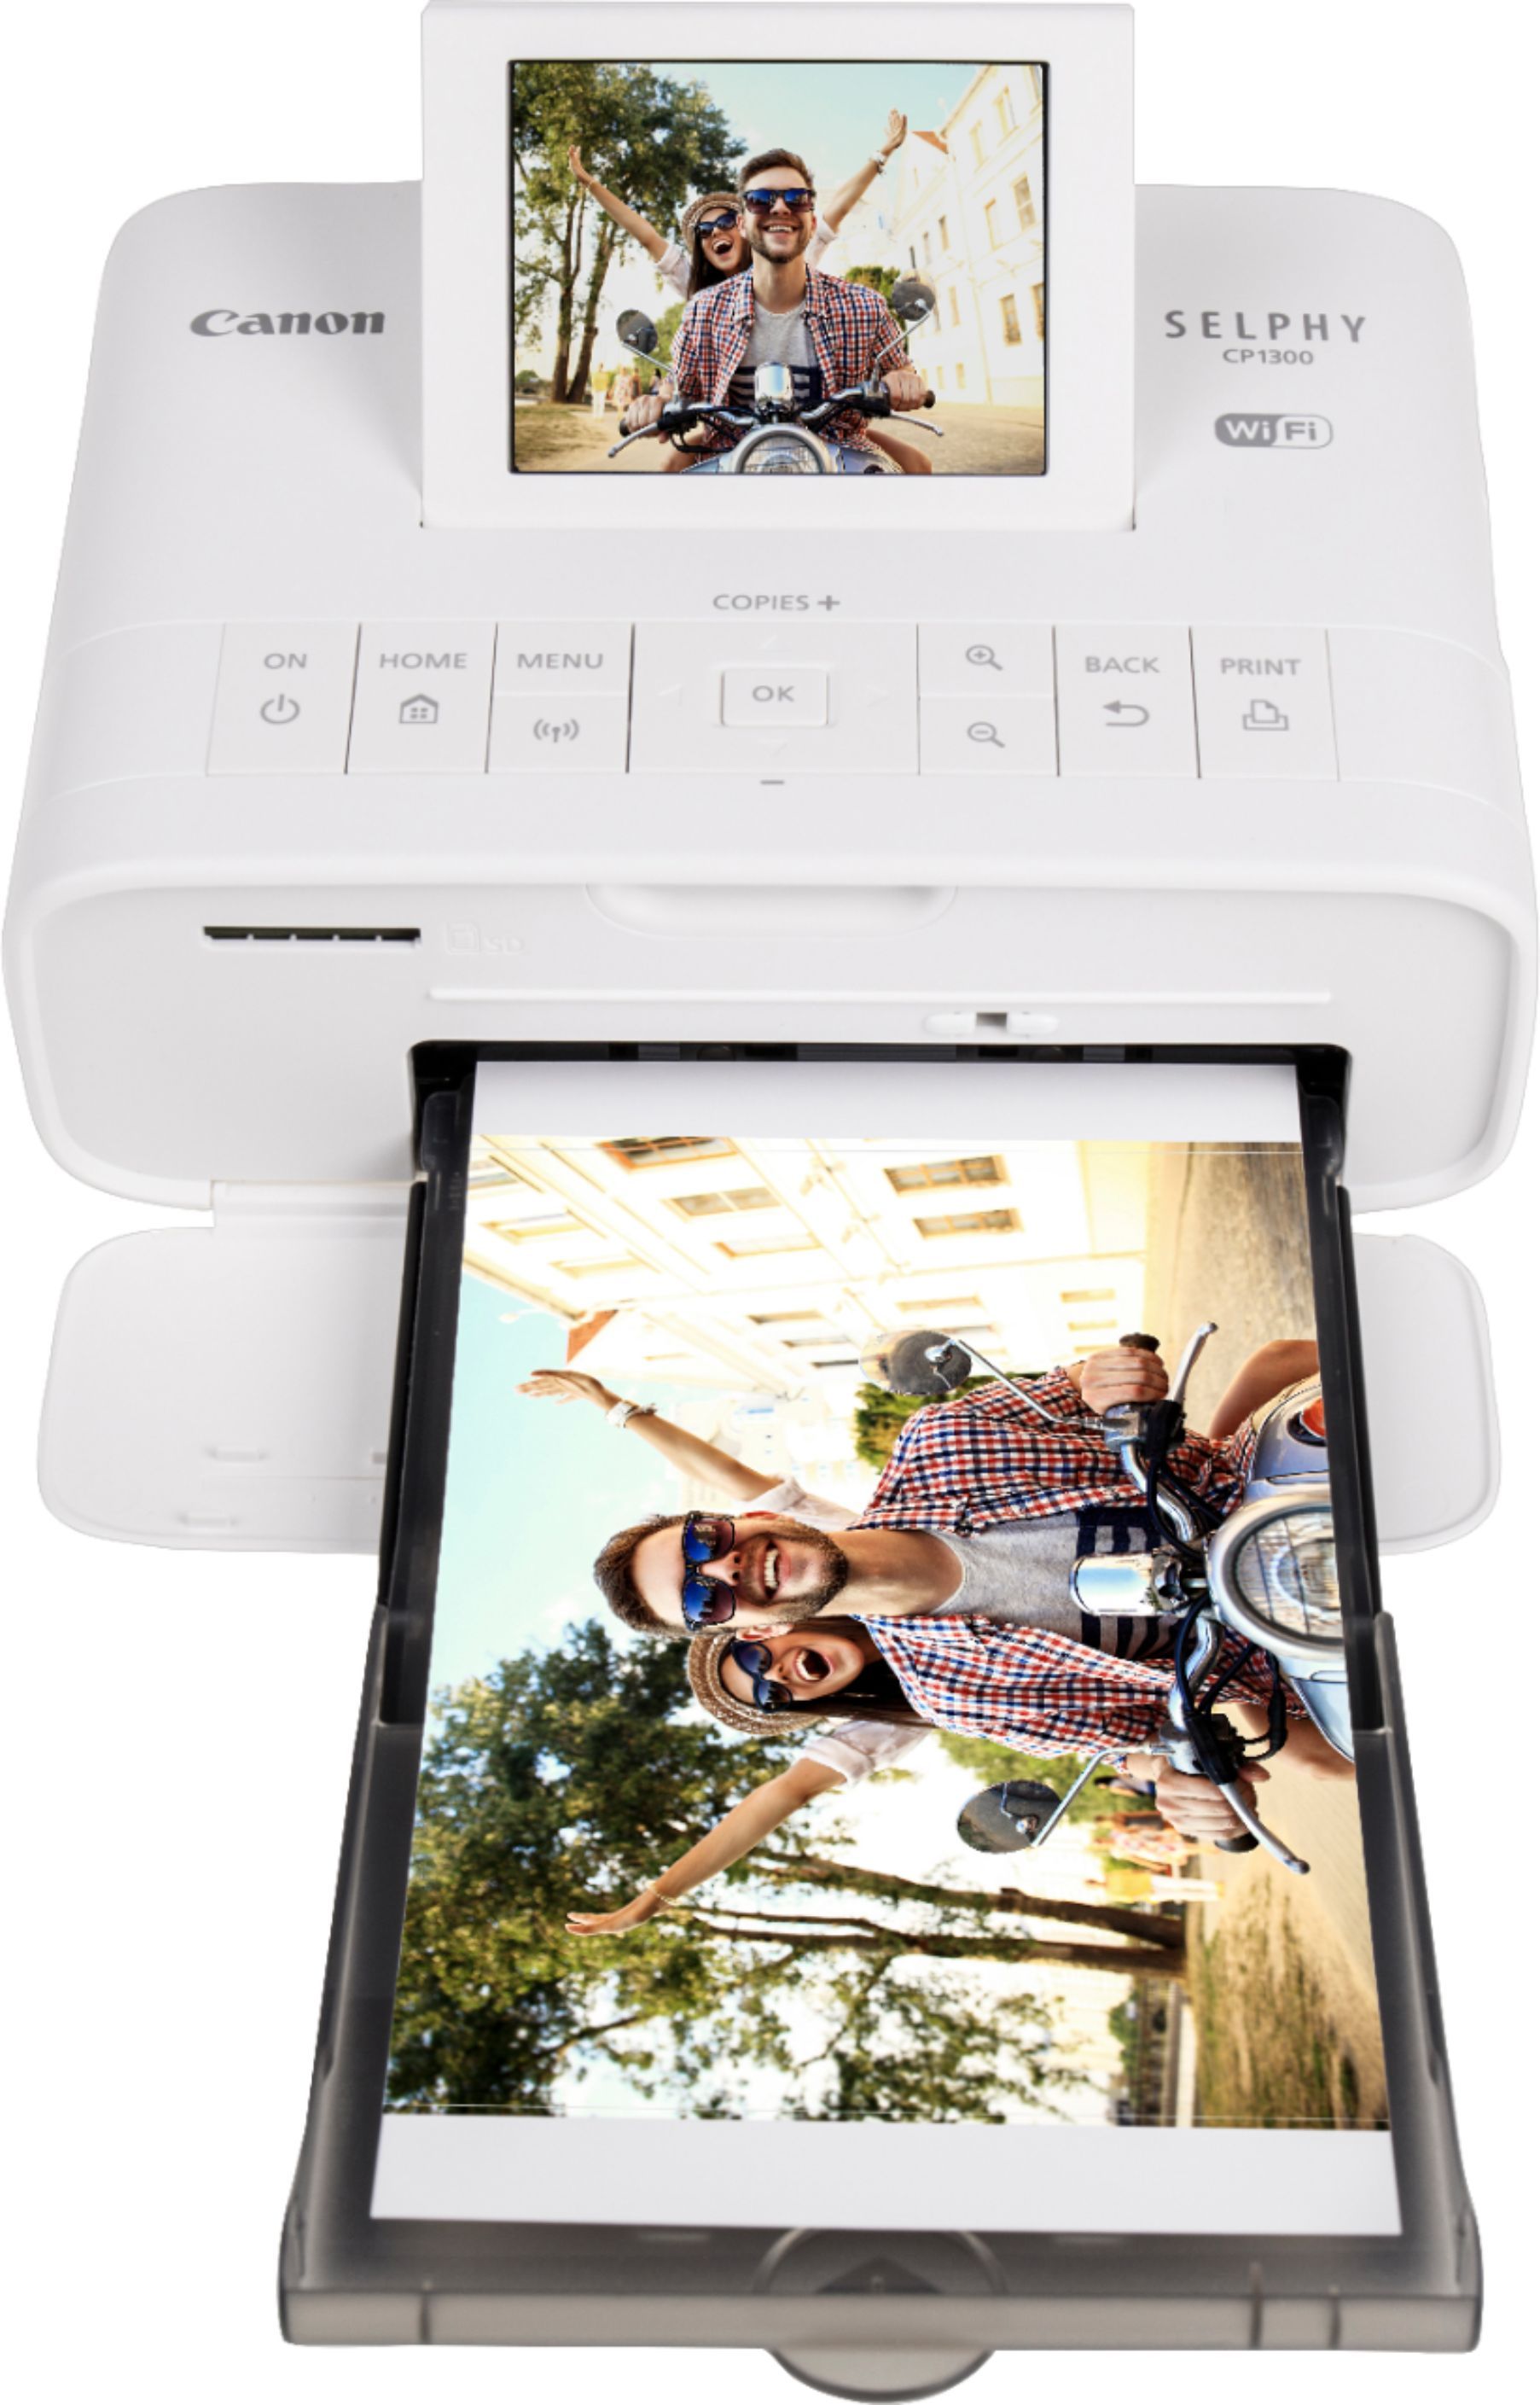 Canon SELPHY CP1300 Wireless Compact Photo Printer White 2235C001 - Best Buy | Best Buy U.S.